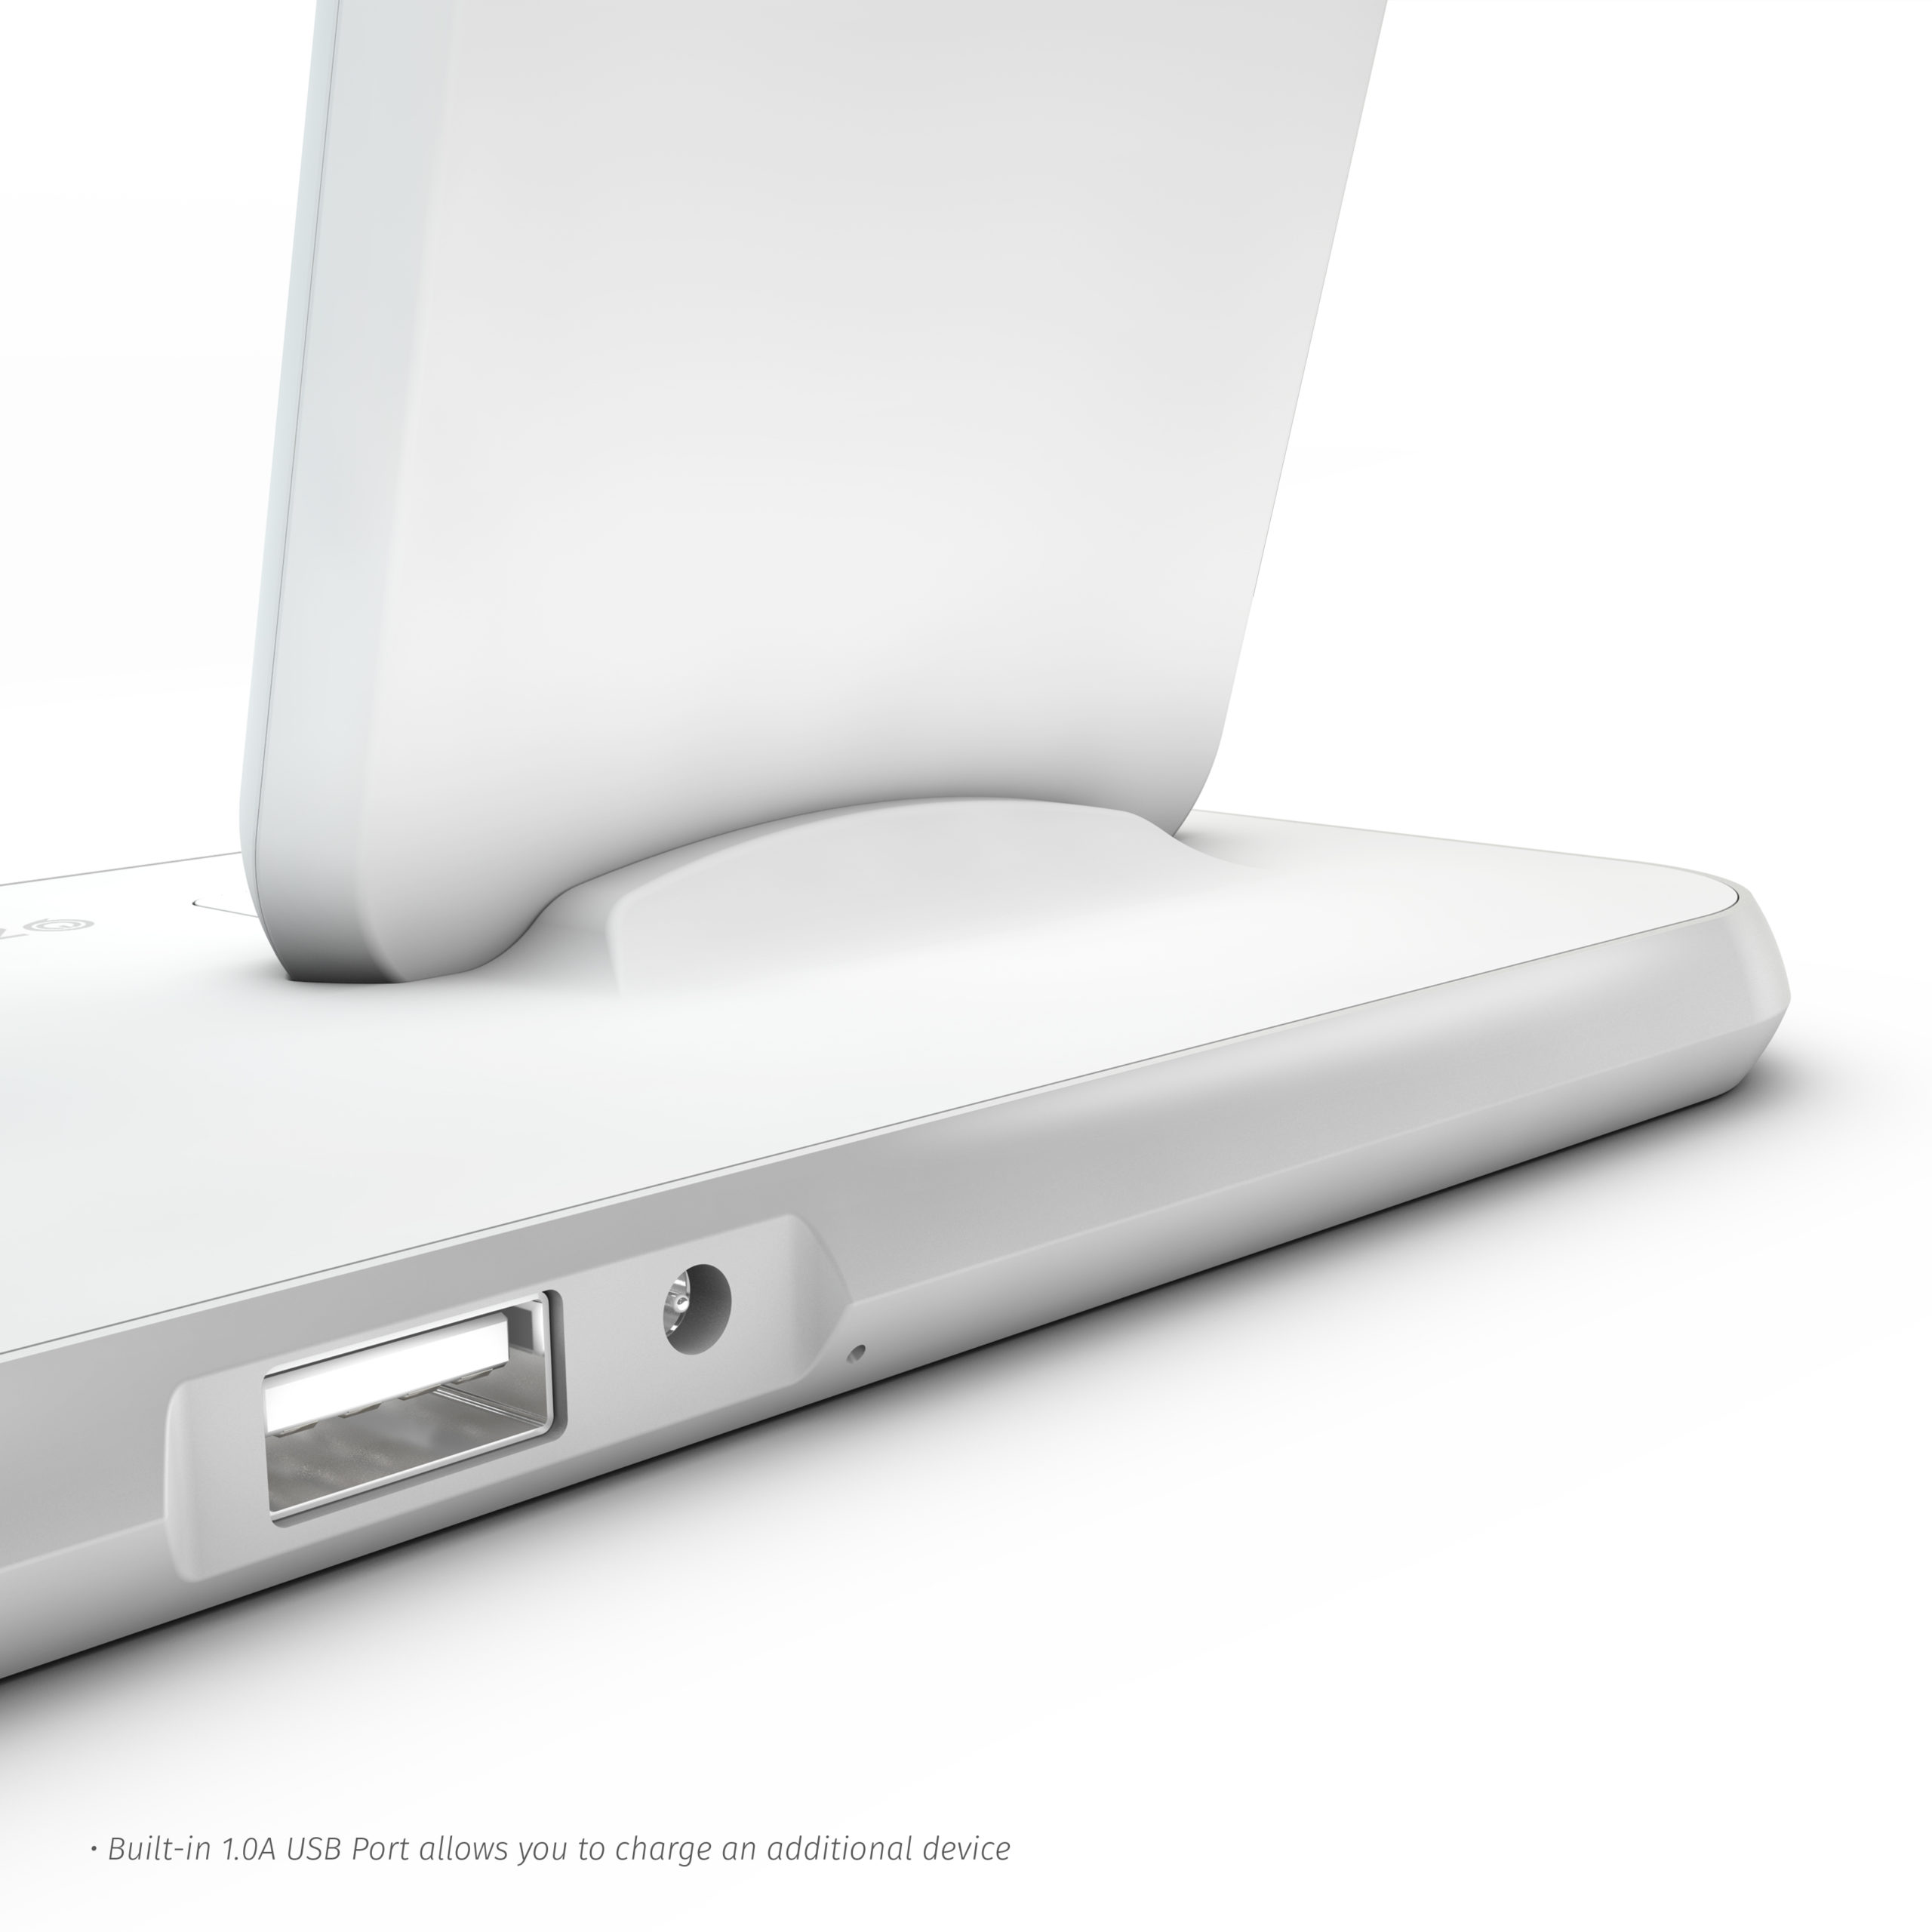 4.-ZENS-StandDock-Aluminium-Wireless-Charger-White-Built-in-USB-port-scaled